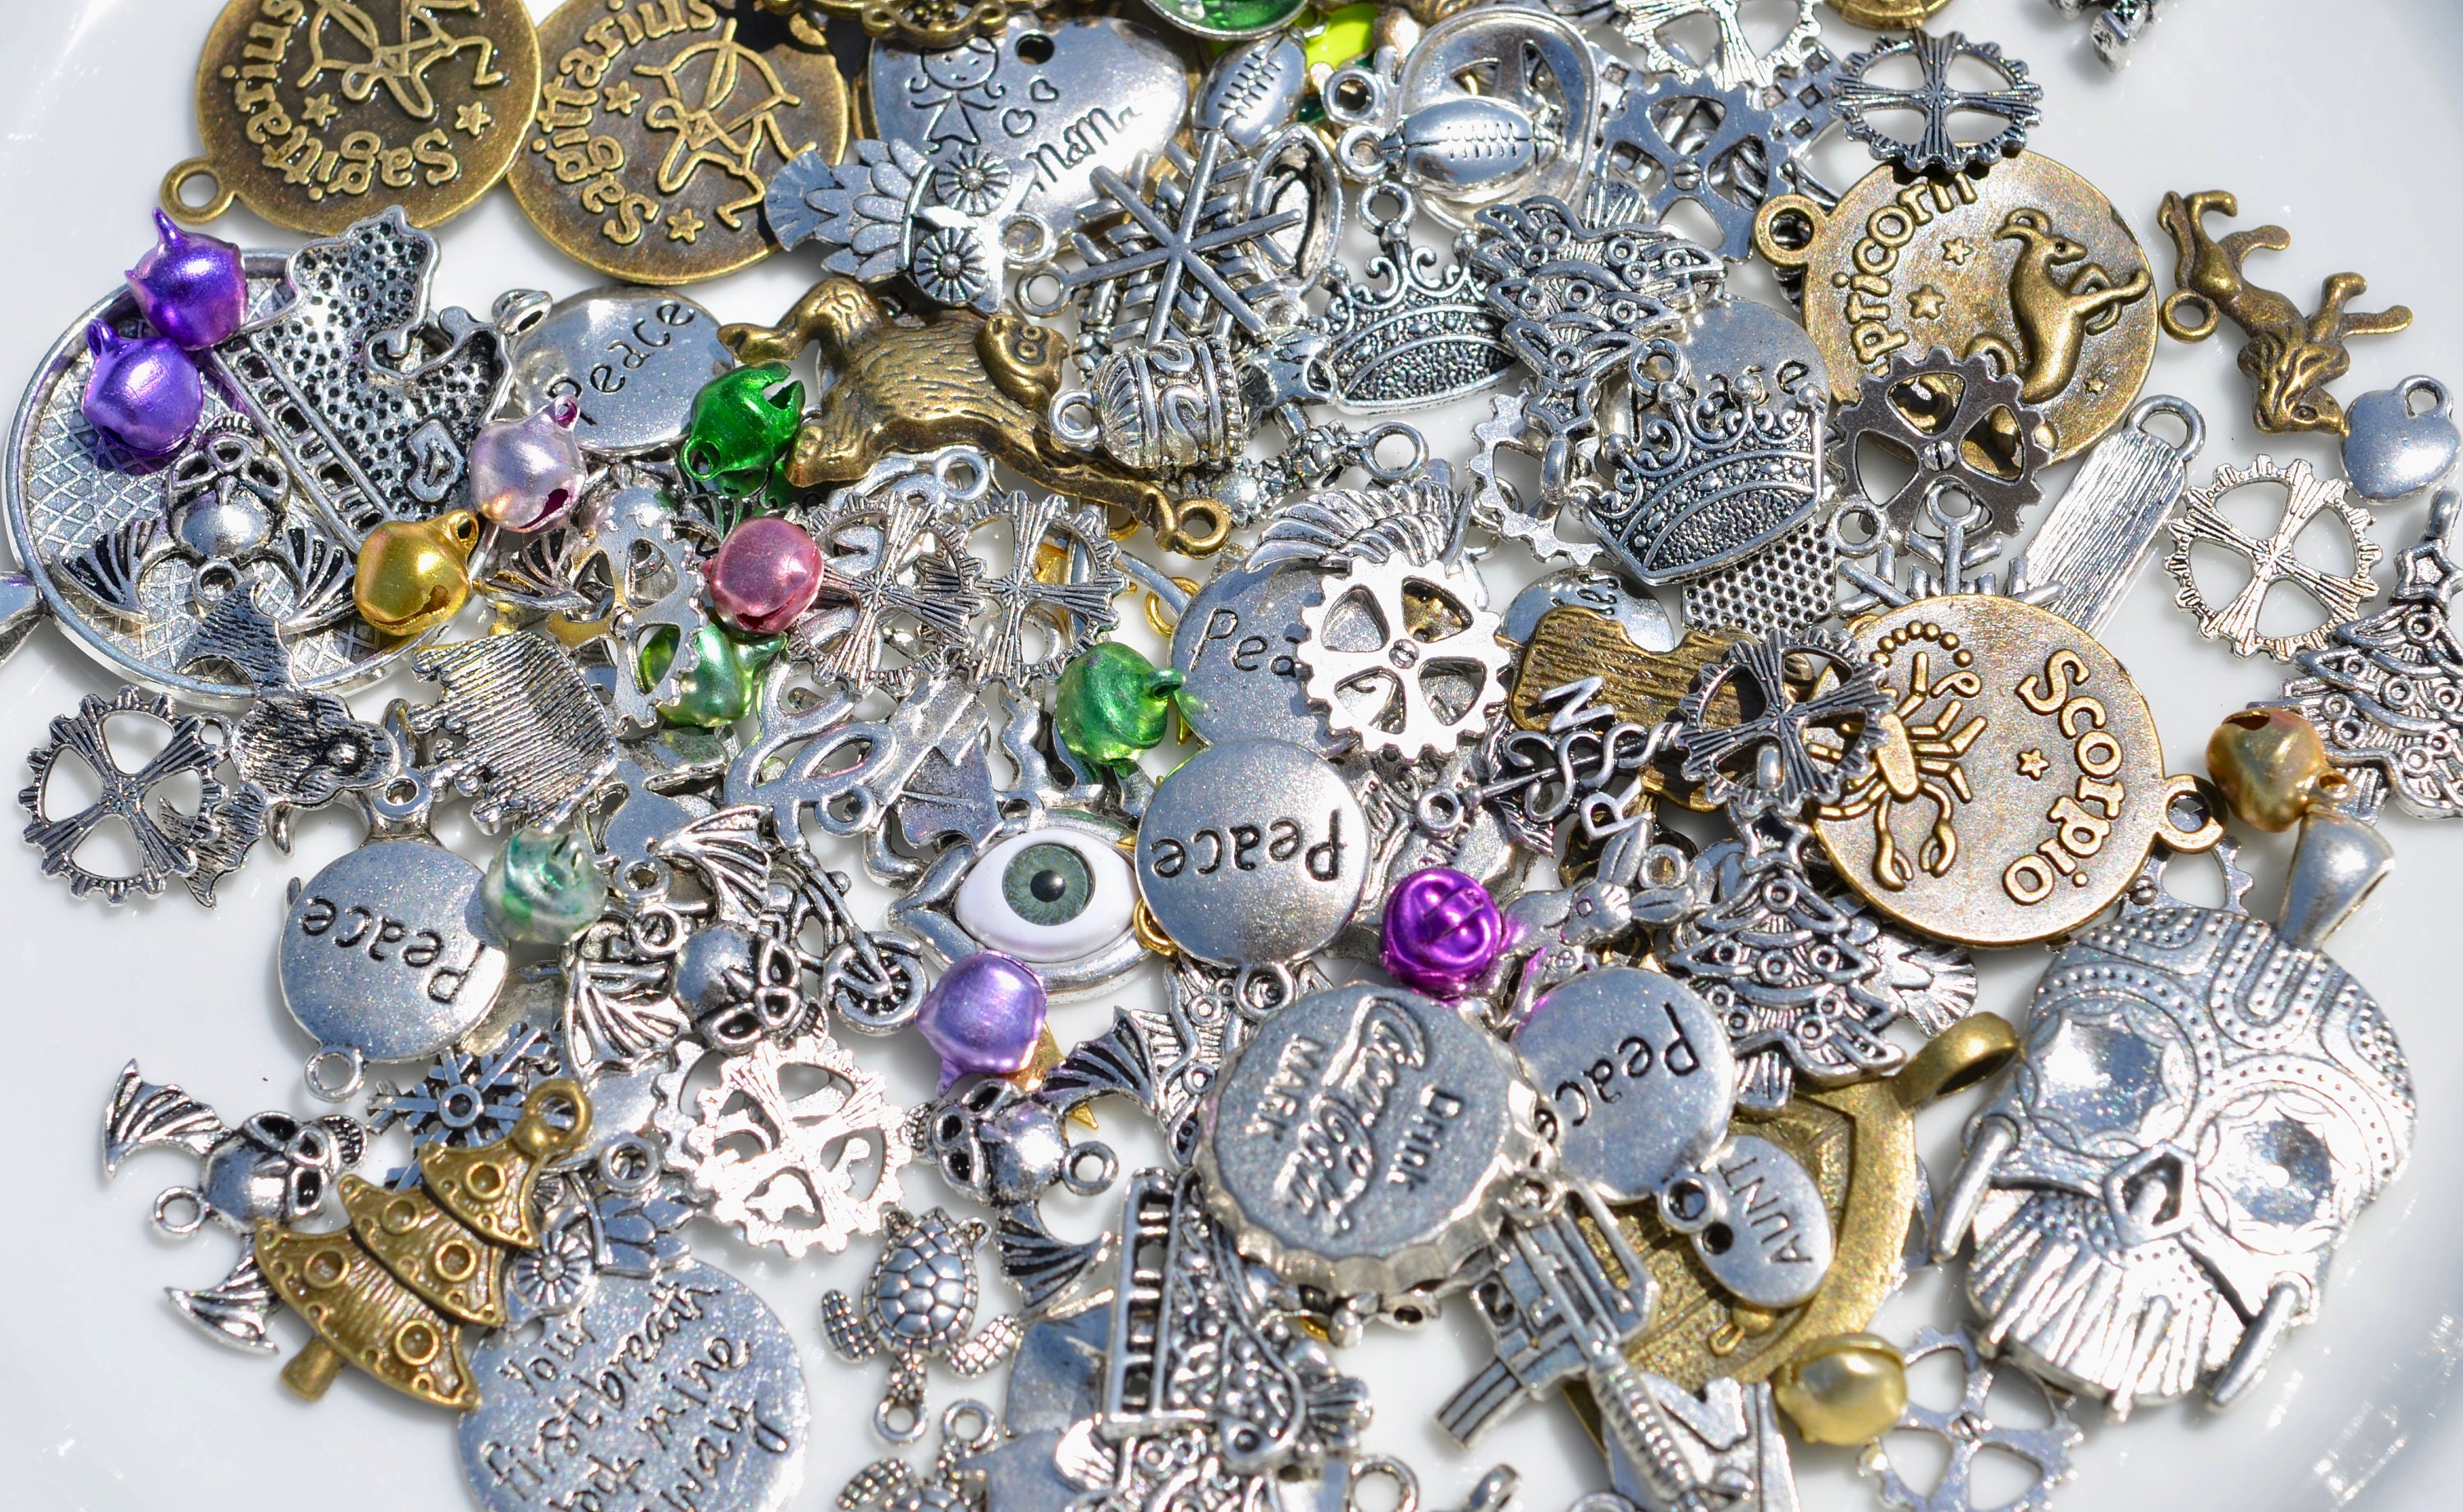 Clearance Charms Bulk Charms for Jewelry Making Charm Pack Wholesale Charms Bulk 10 Ounces Wholesale Charms Hundreds of Charms